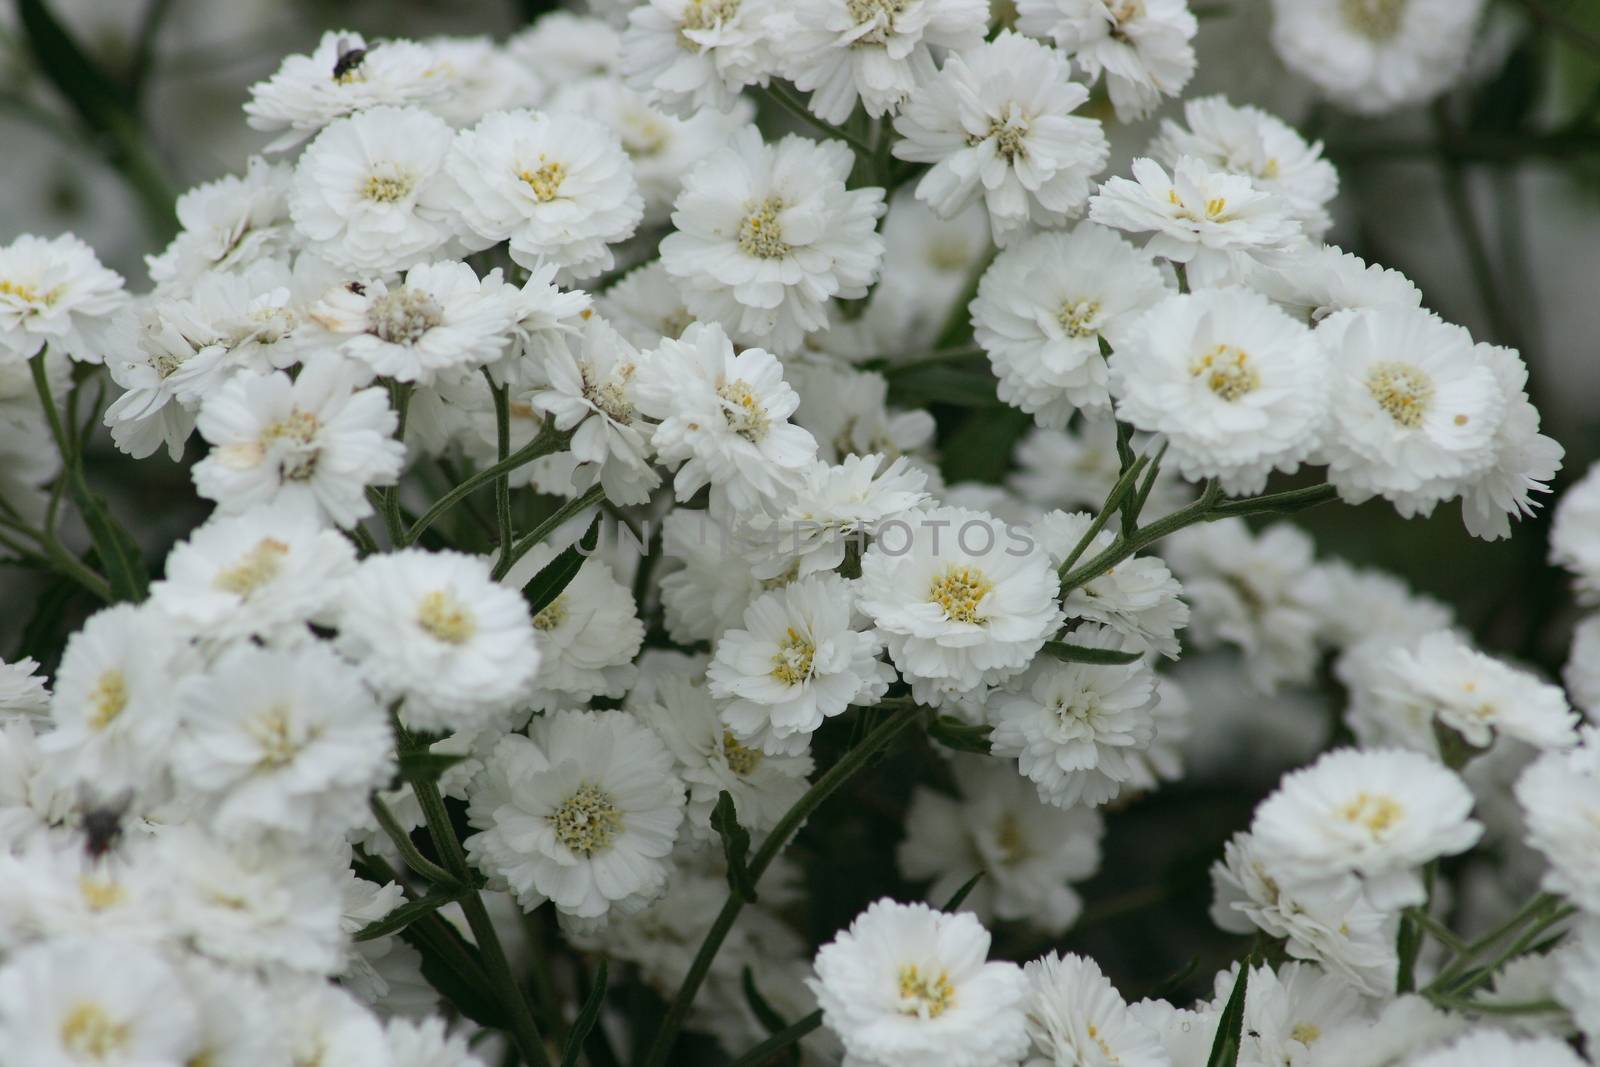 A white-flowering yarrow (Achillea ptarmica "Pearl"), also known as swamp filled Yarrow